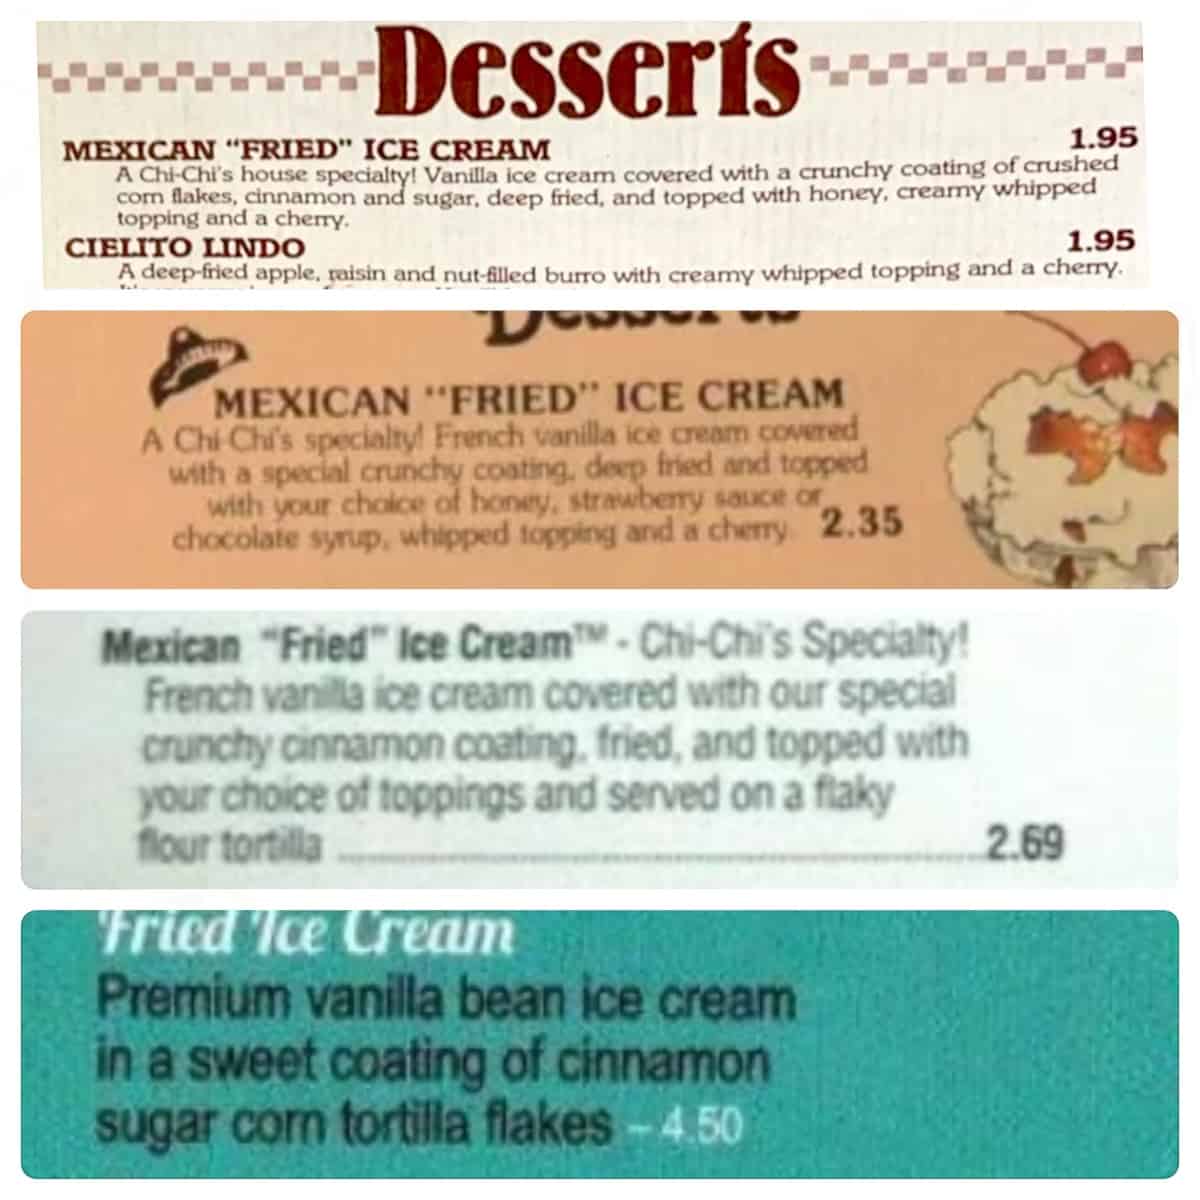 clips of fried ice cream from chi-chi's menus.